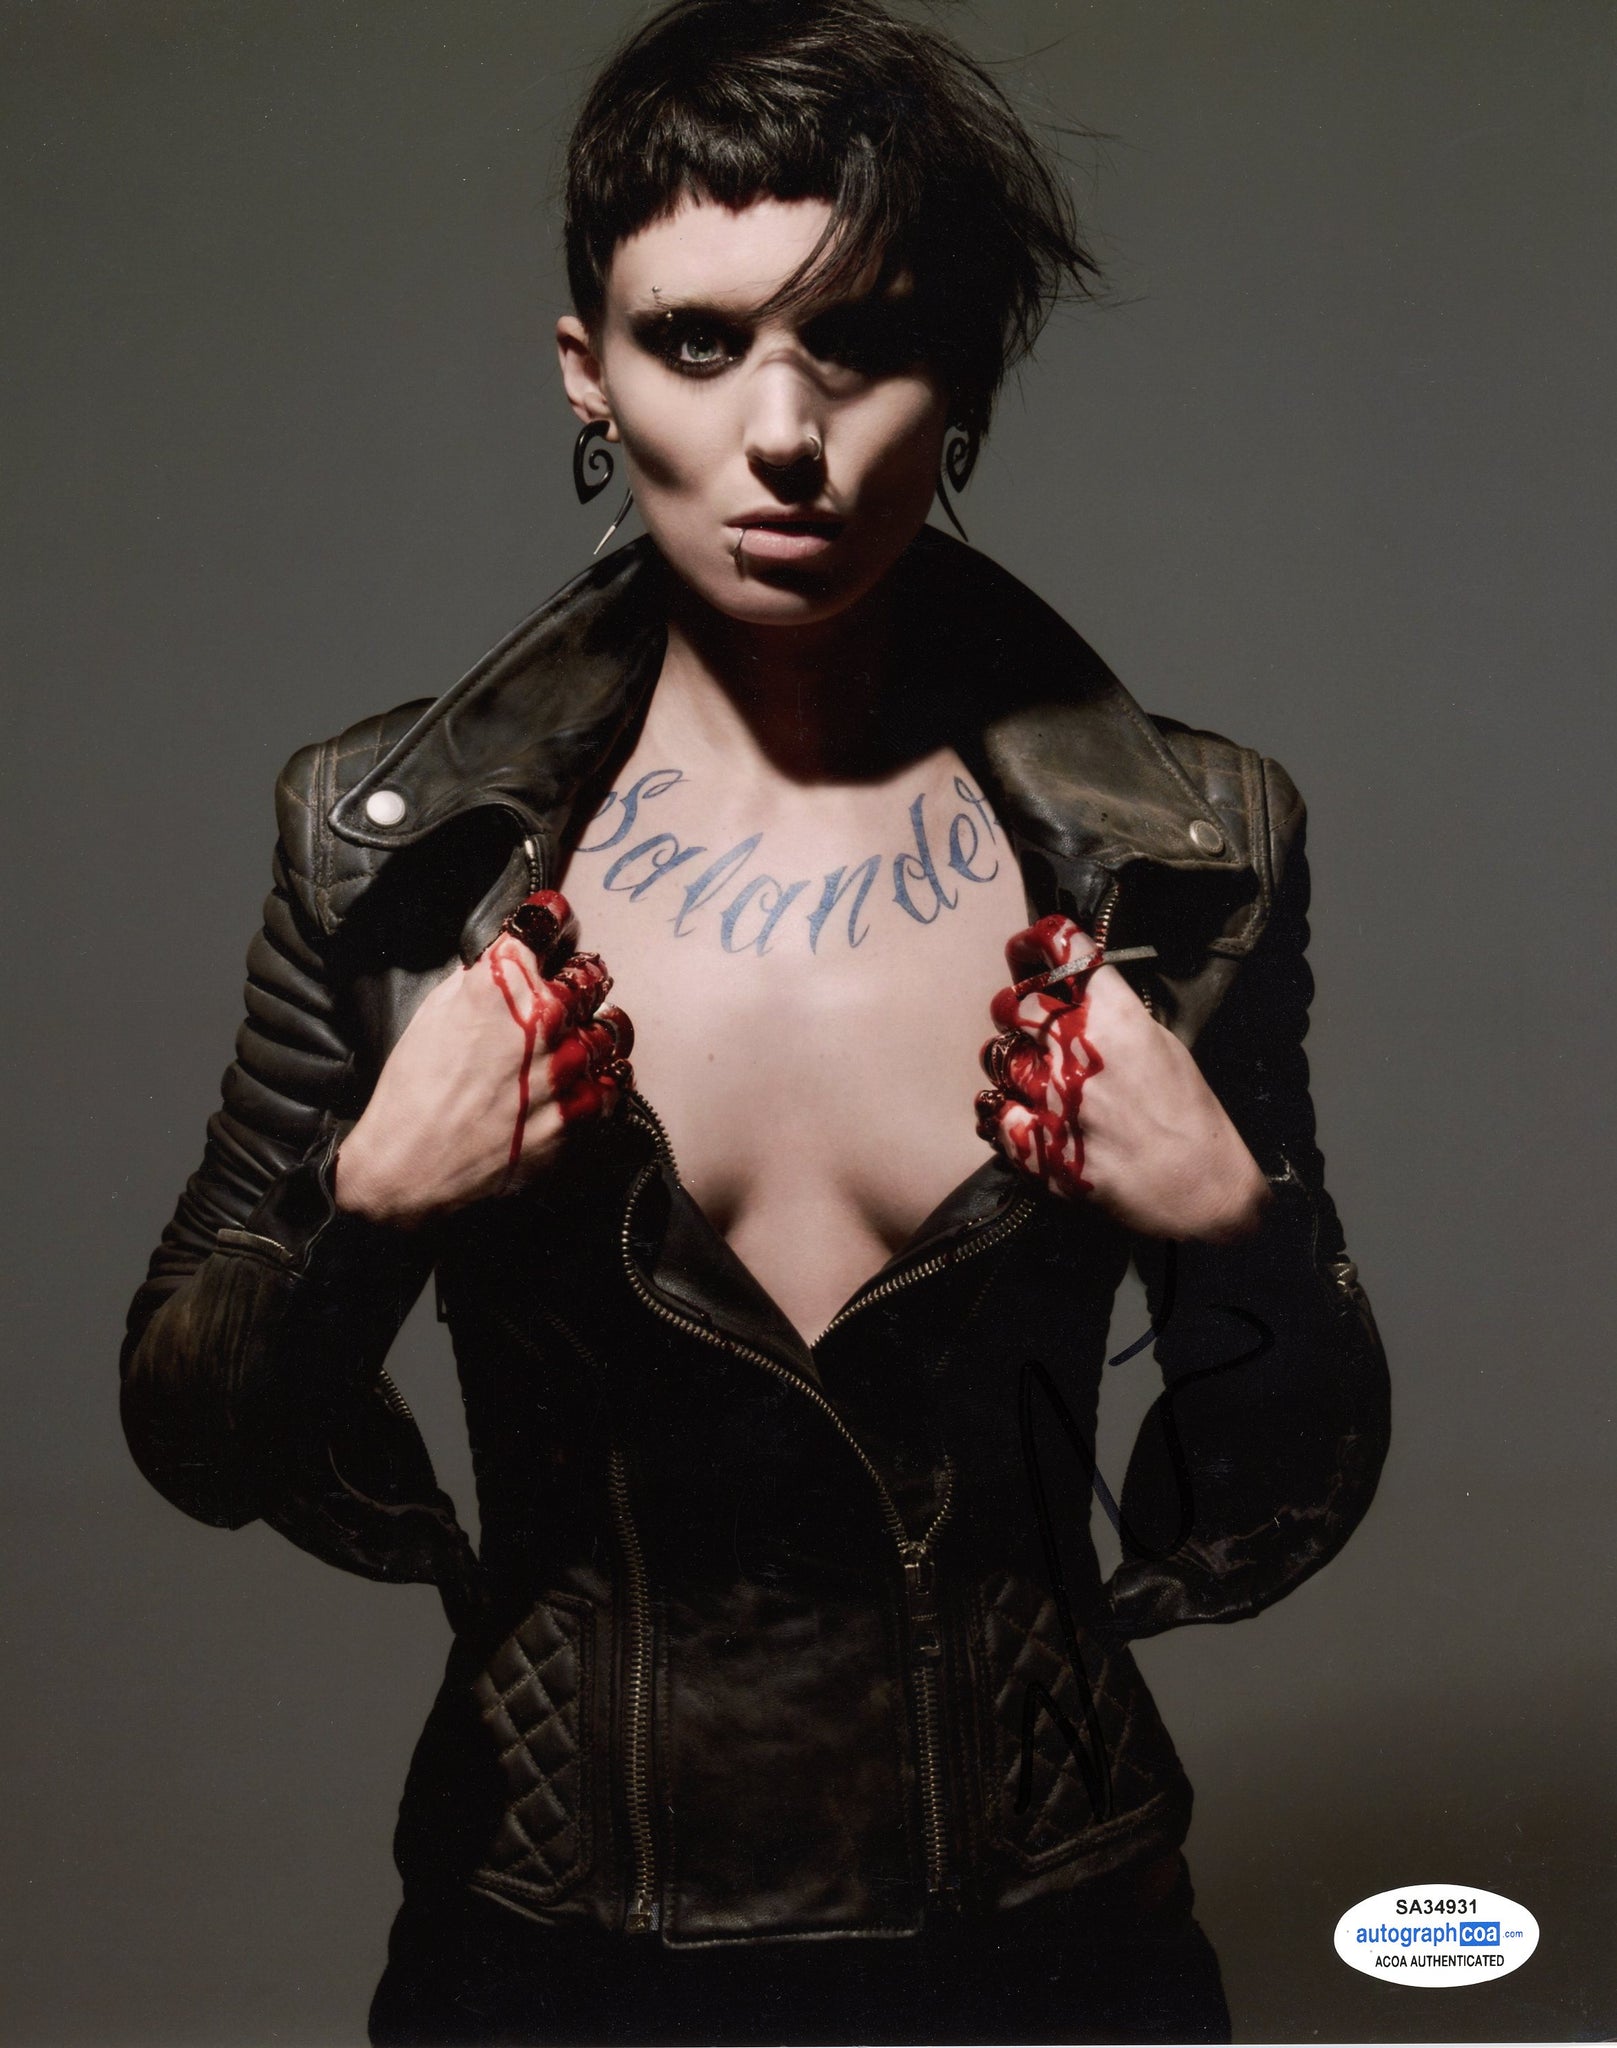 Rooney Mara Dragon Tattoo Sexy Signed Autograph 8x10 Photo ACOA - Outlaw Hobbies Authentic Autographs